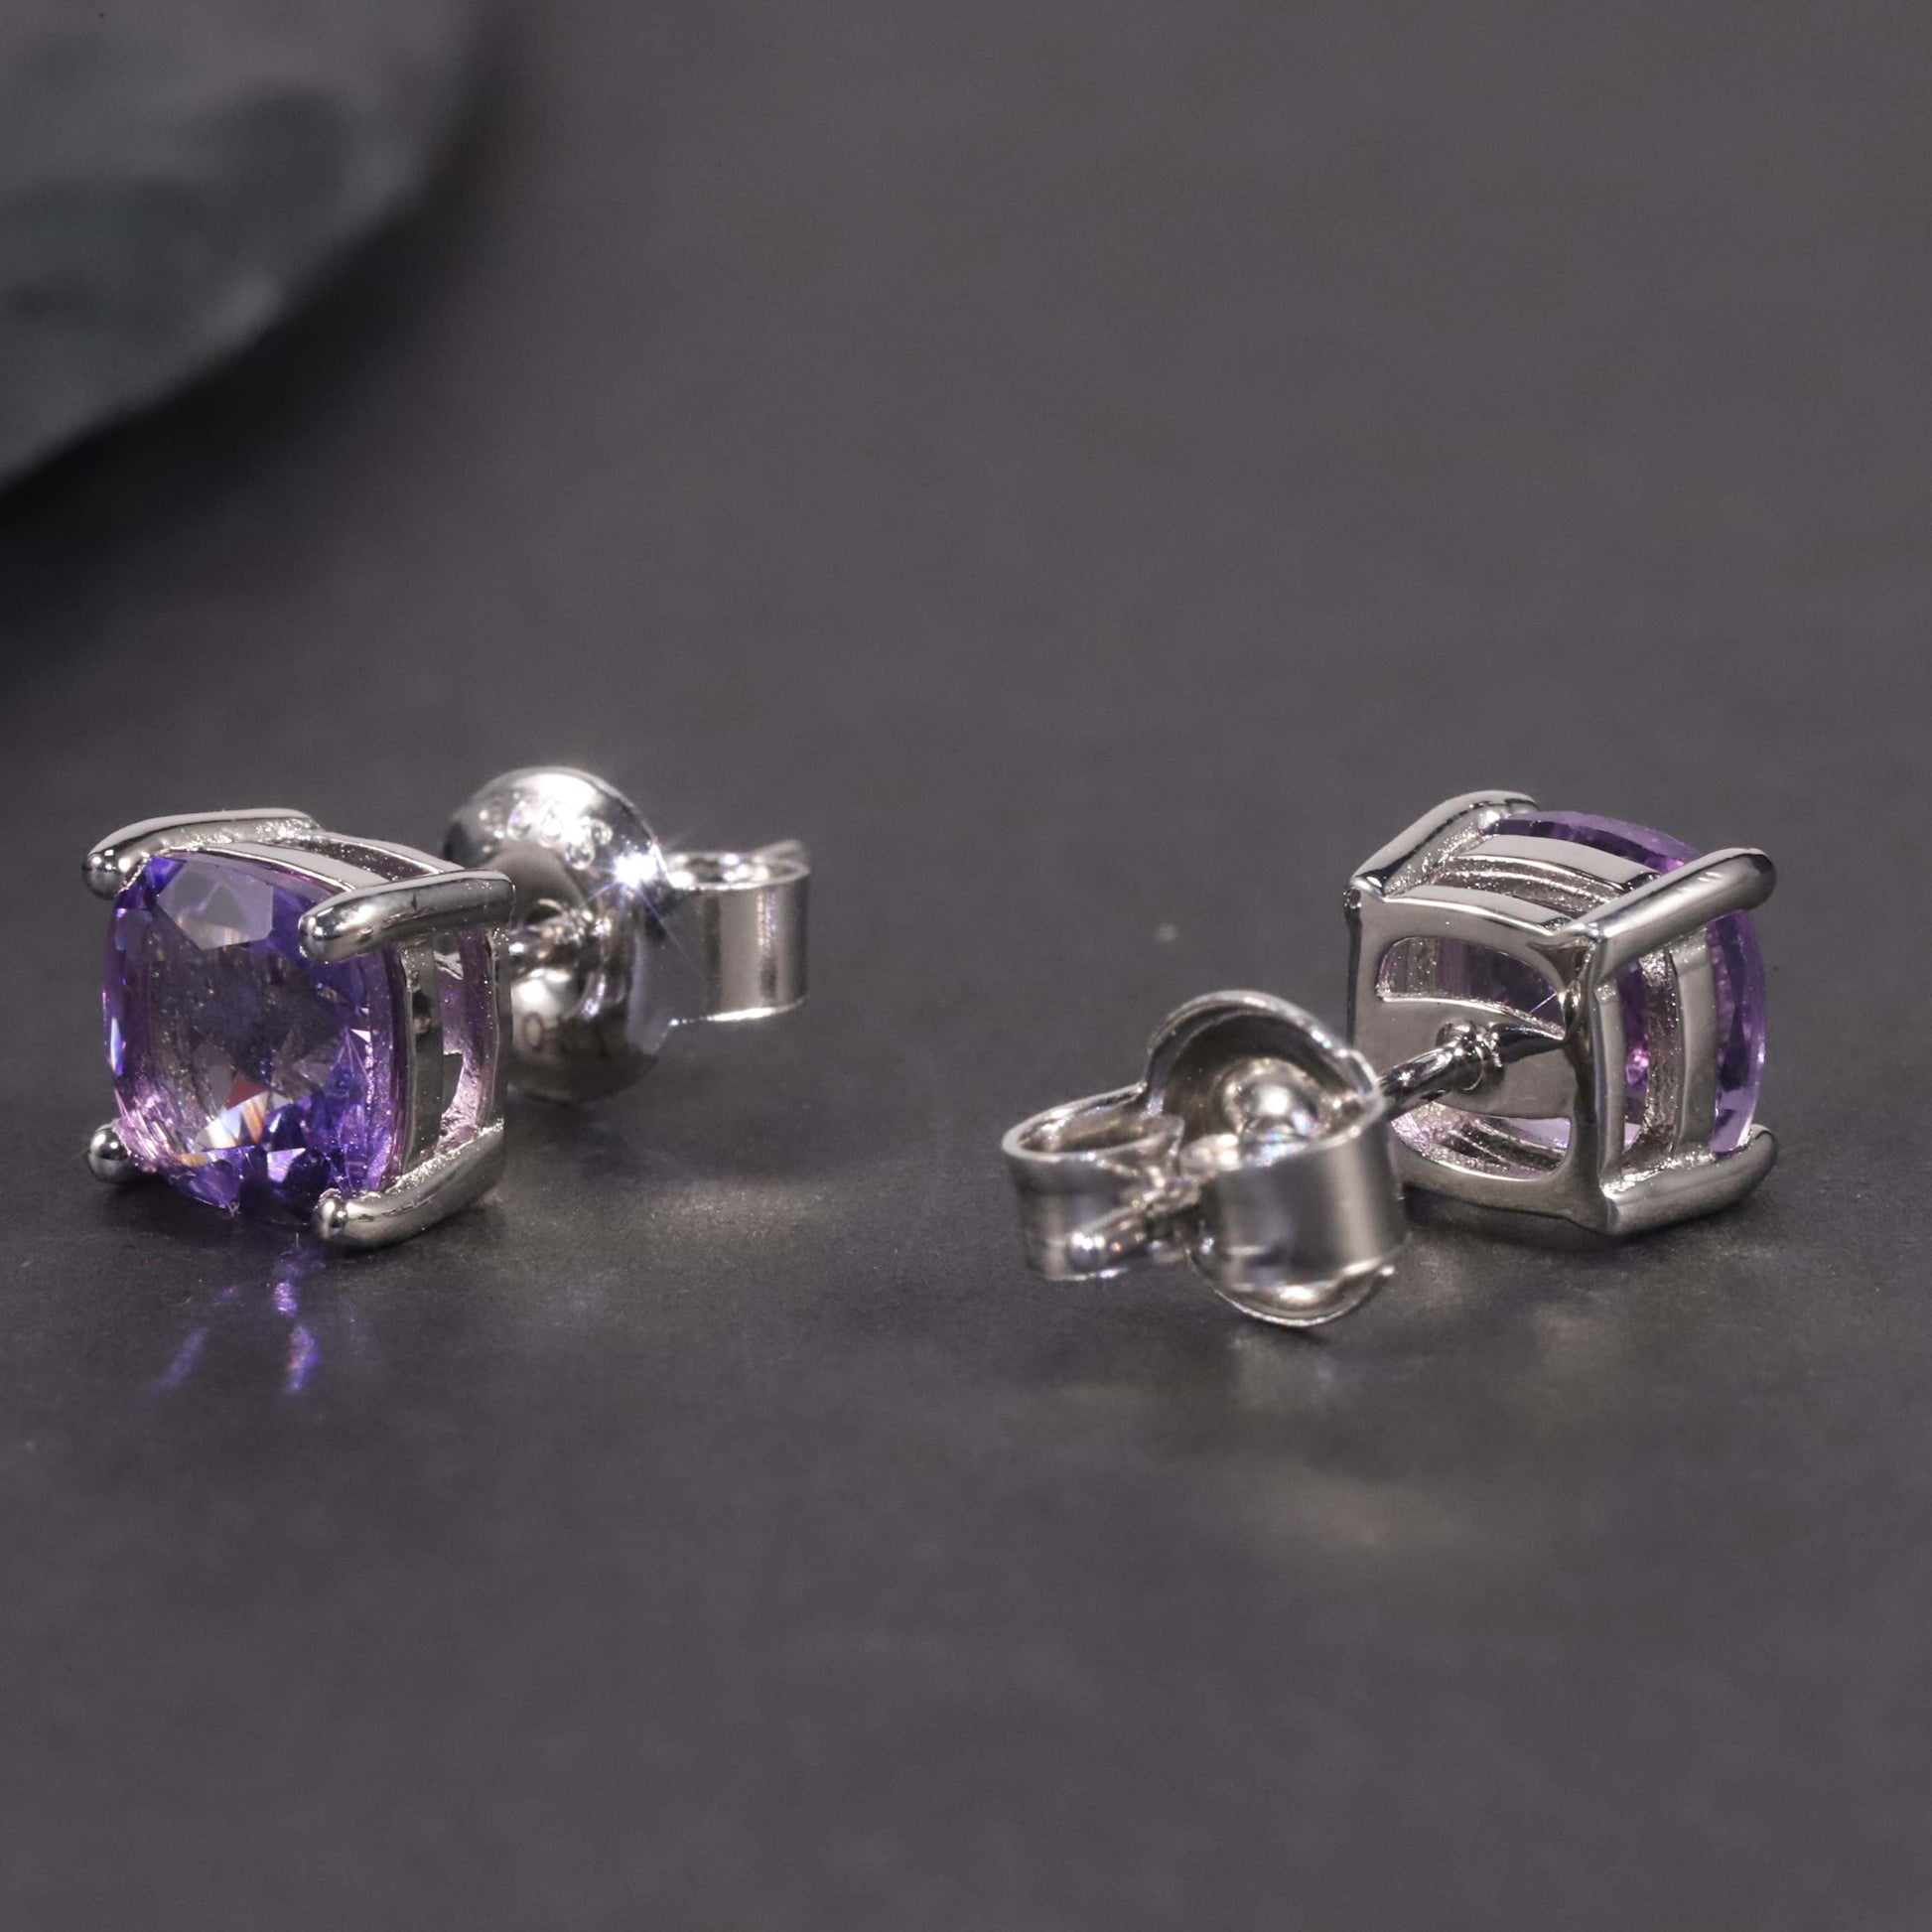 another angle of cushion cut amethyst studs in dark background